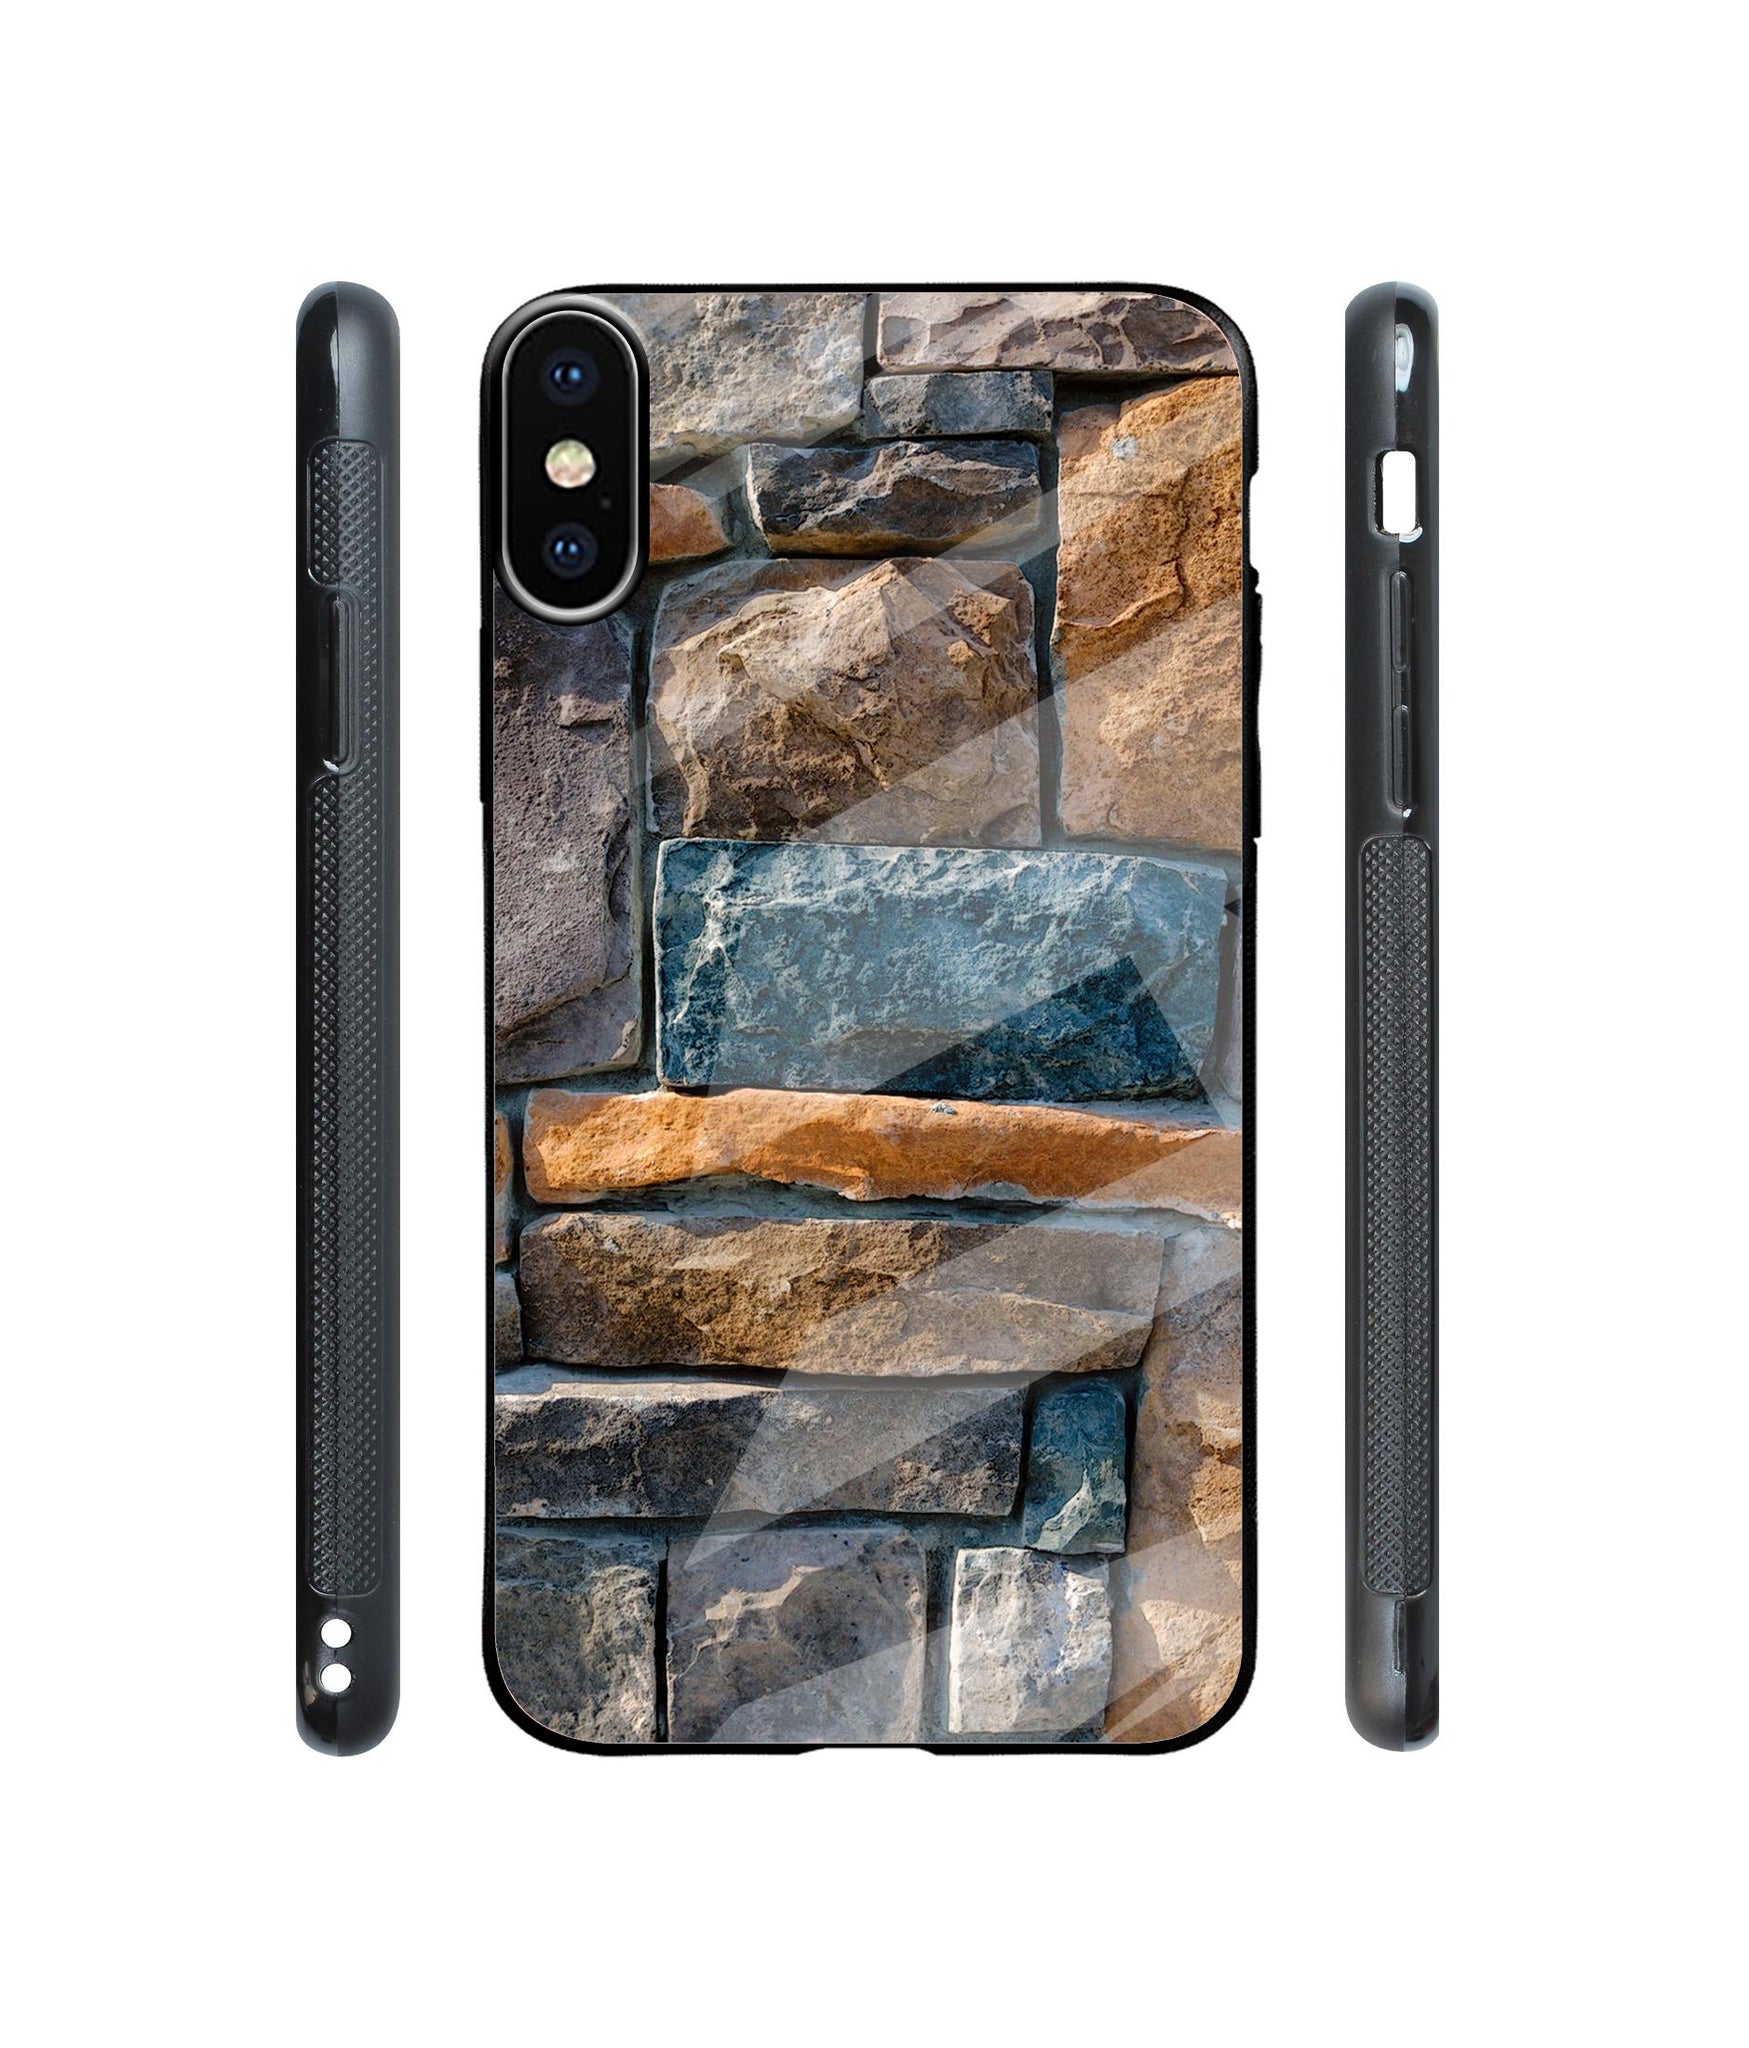 Decorative Stone Cladding Designer Printed Glass Cover for Apple iPhone XS Max